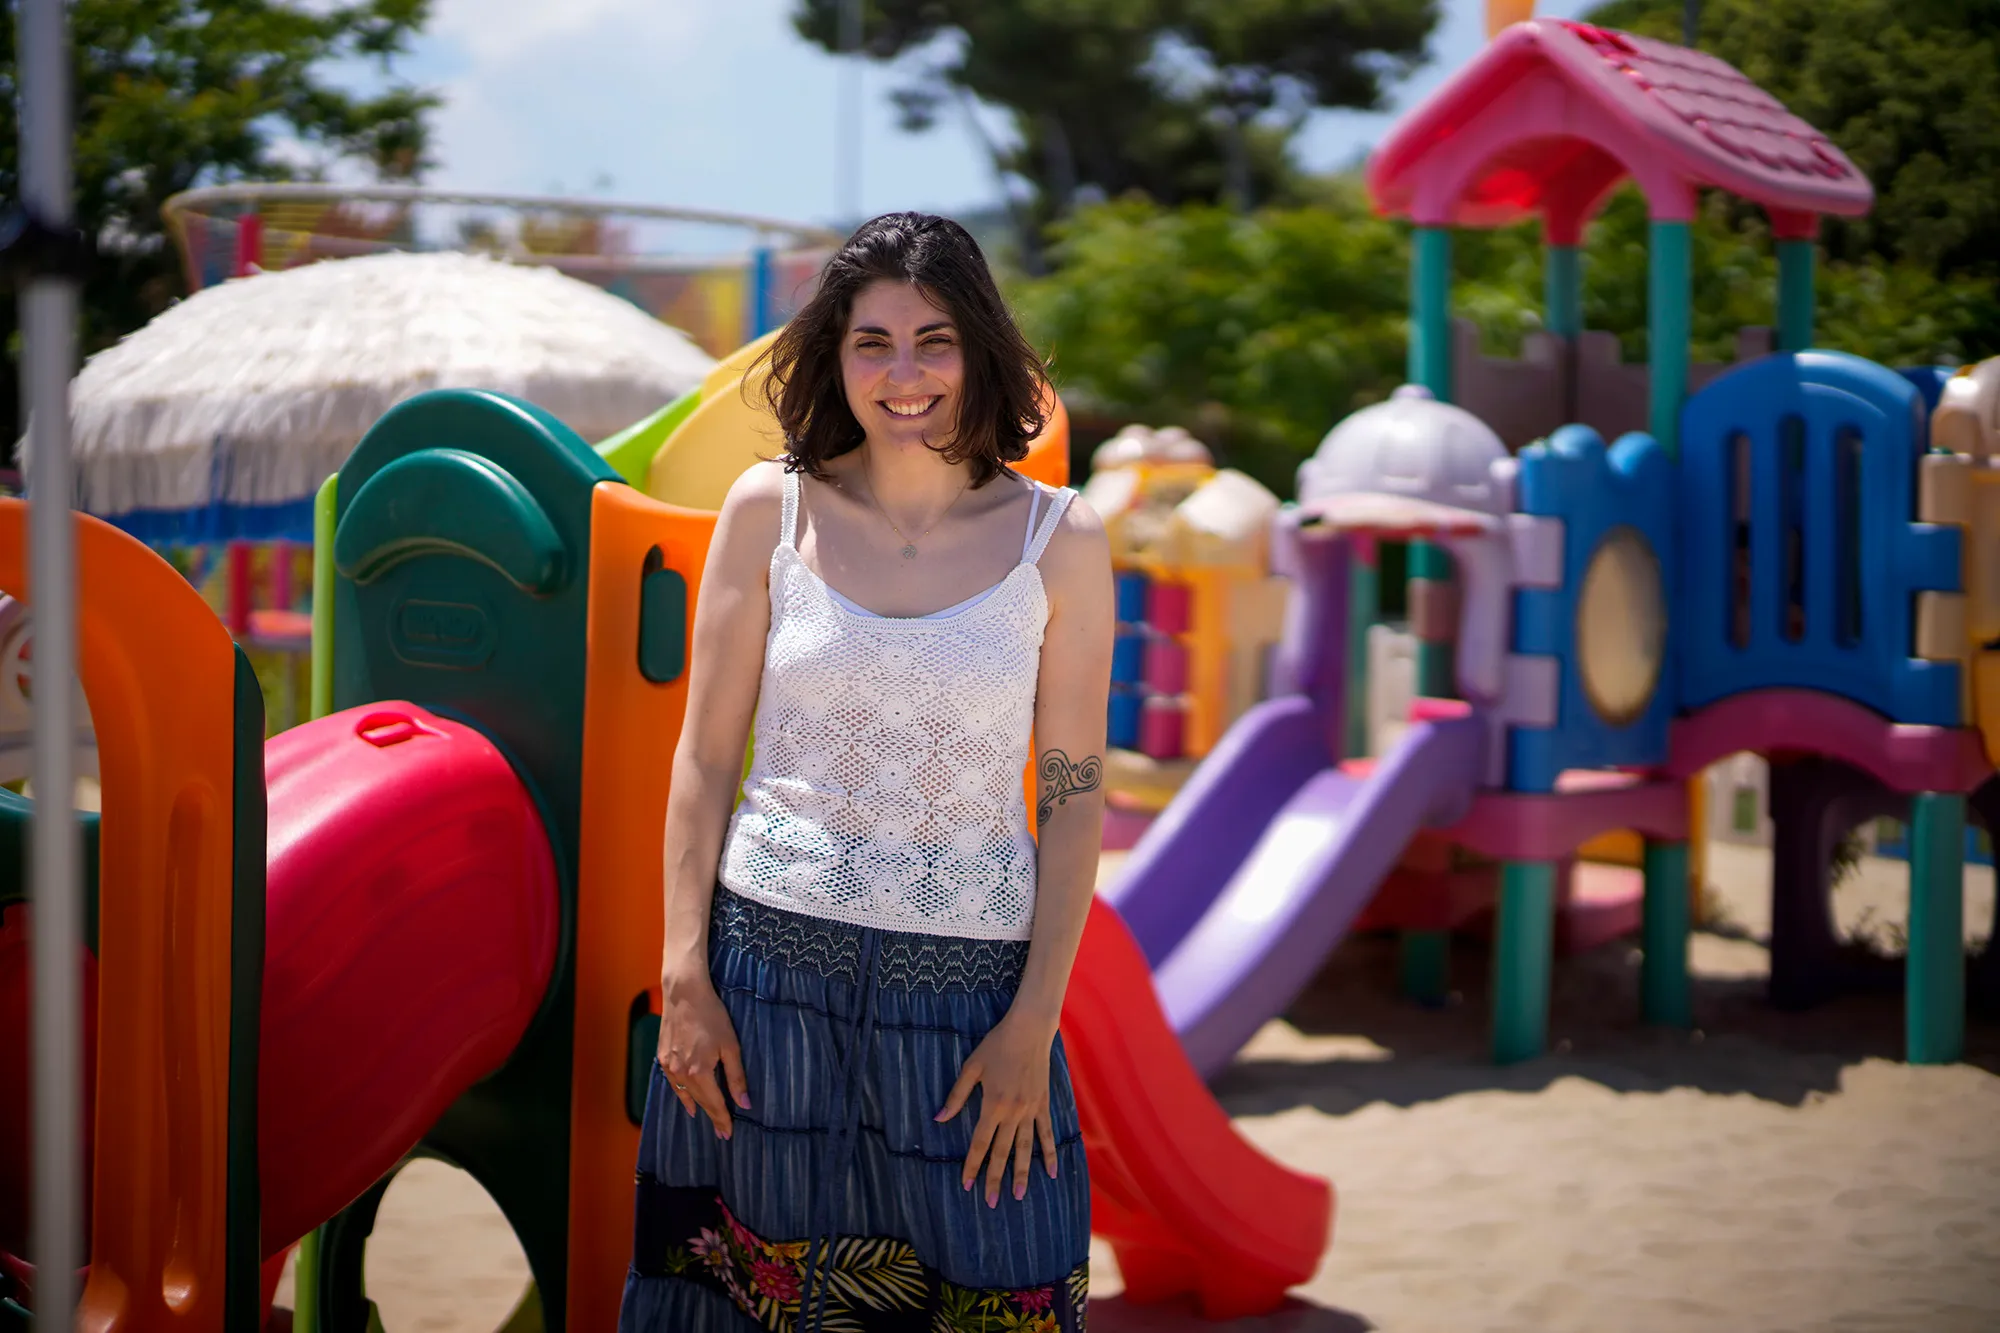 Federica Nobil standing in front of a playground